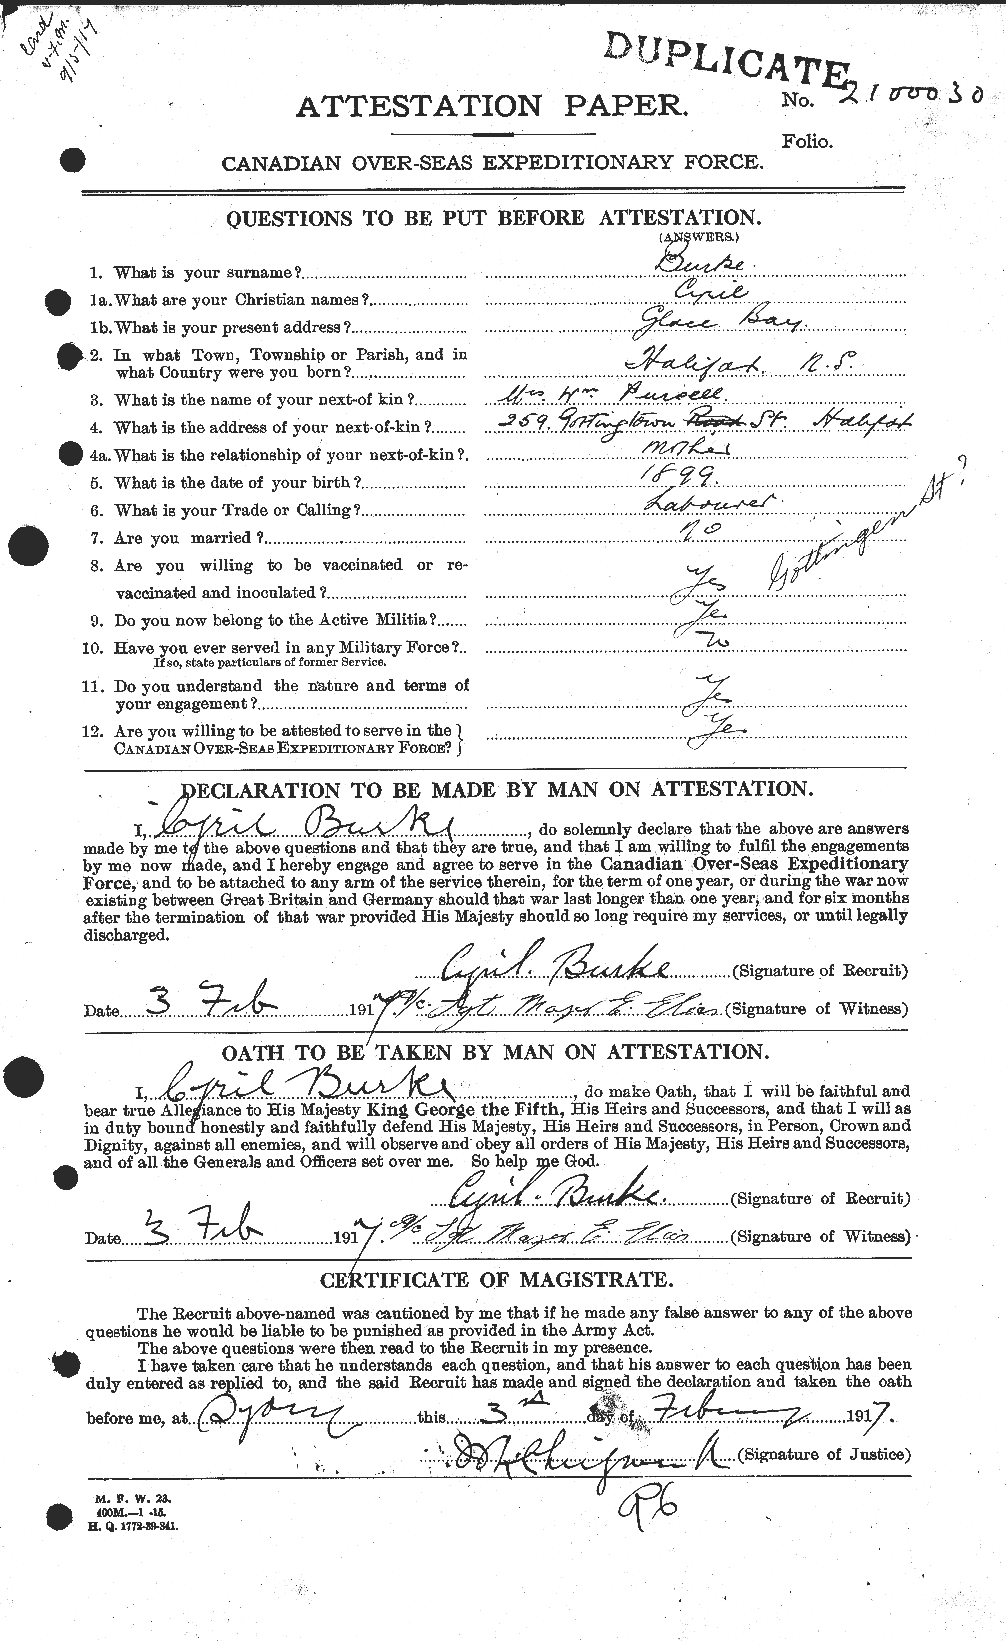 Personnel Records of the First World War - CEF 272396a